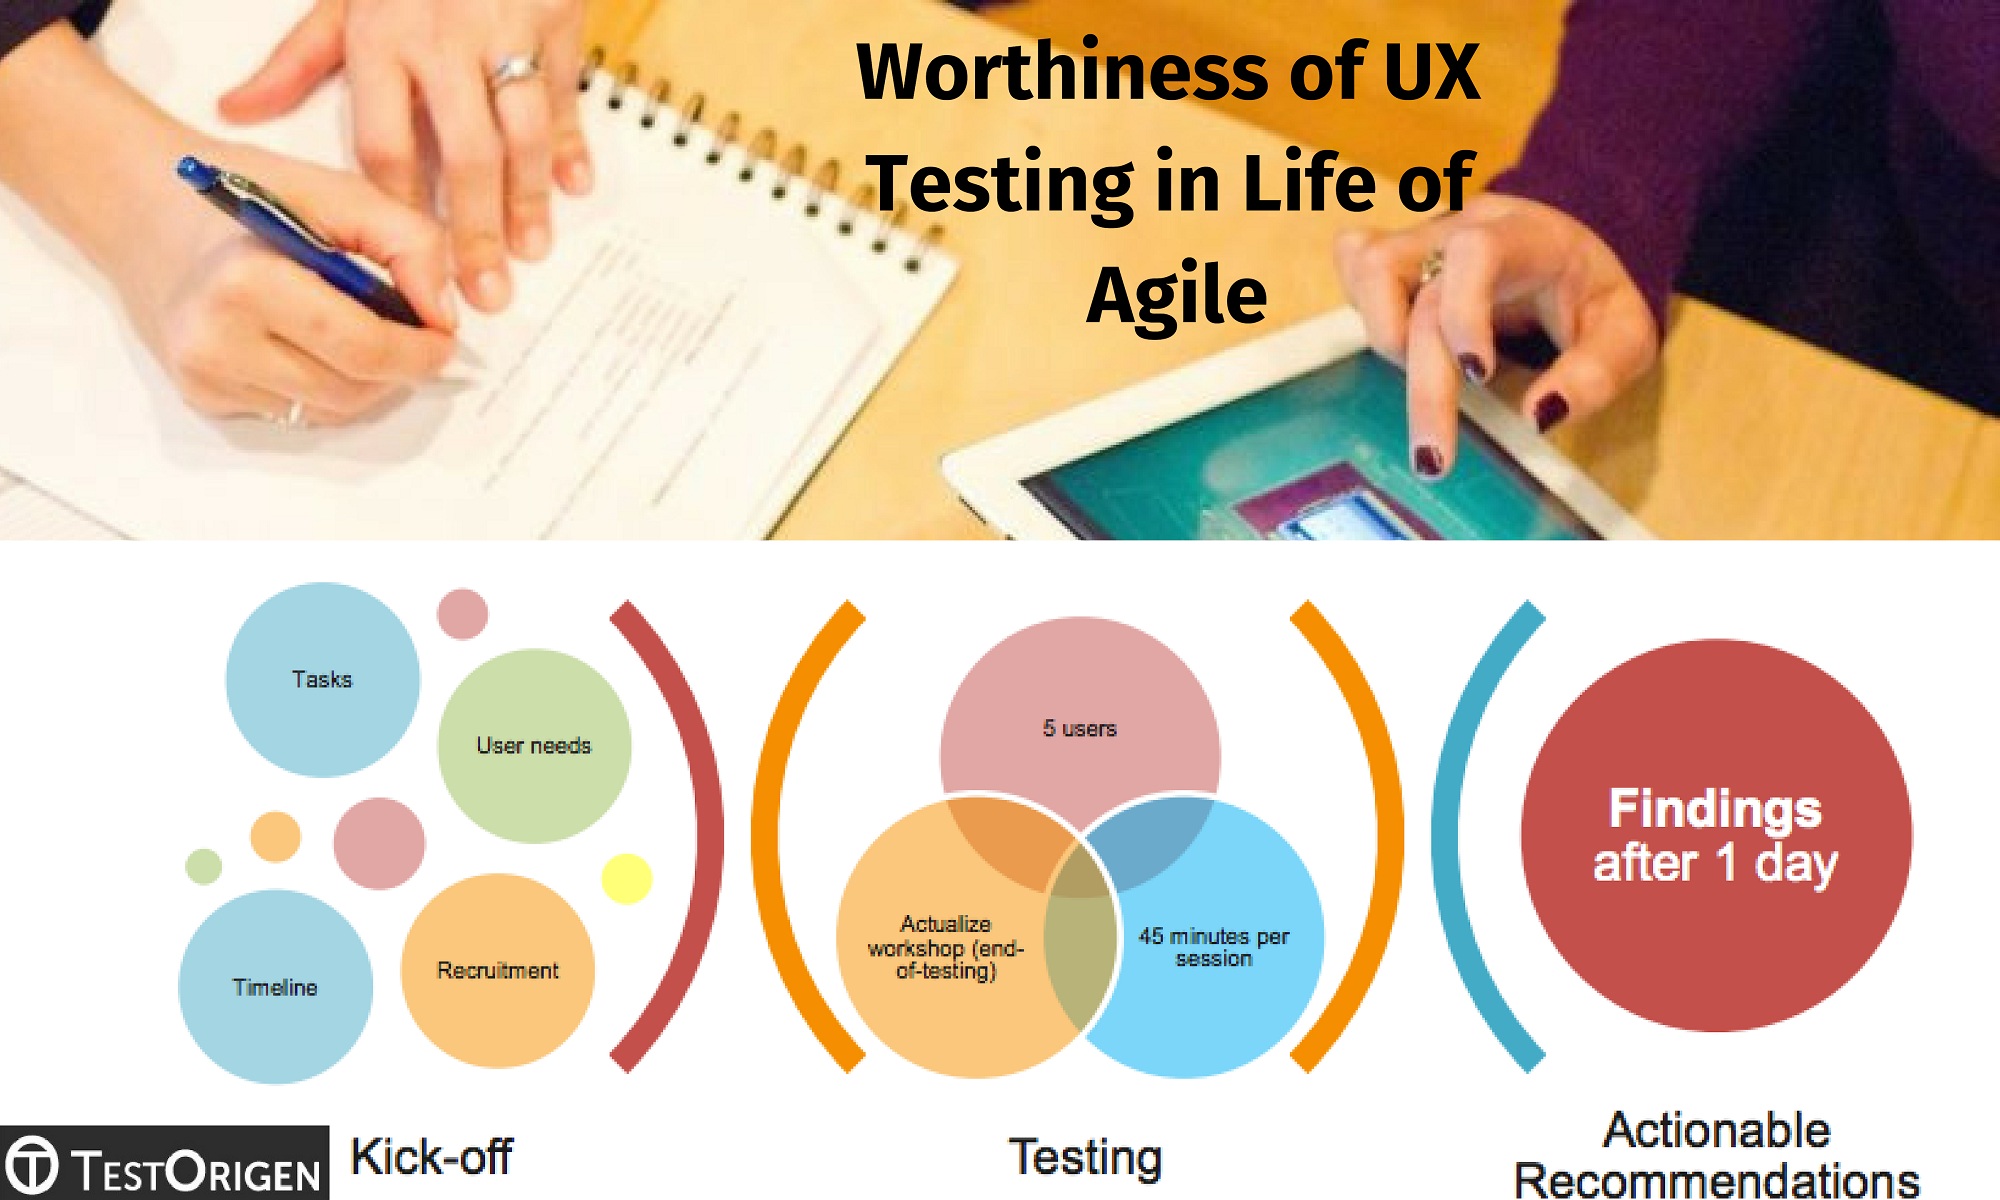 Worthiness of UX Testing in Life of Agile